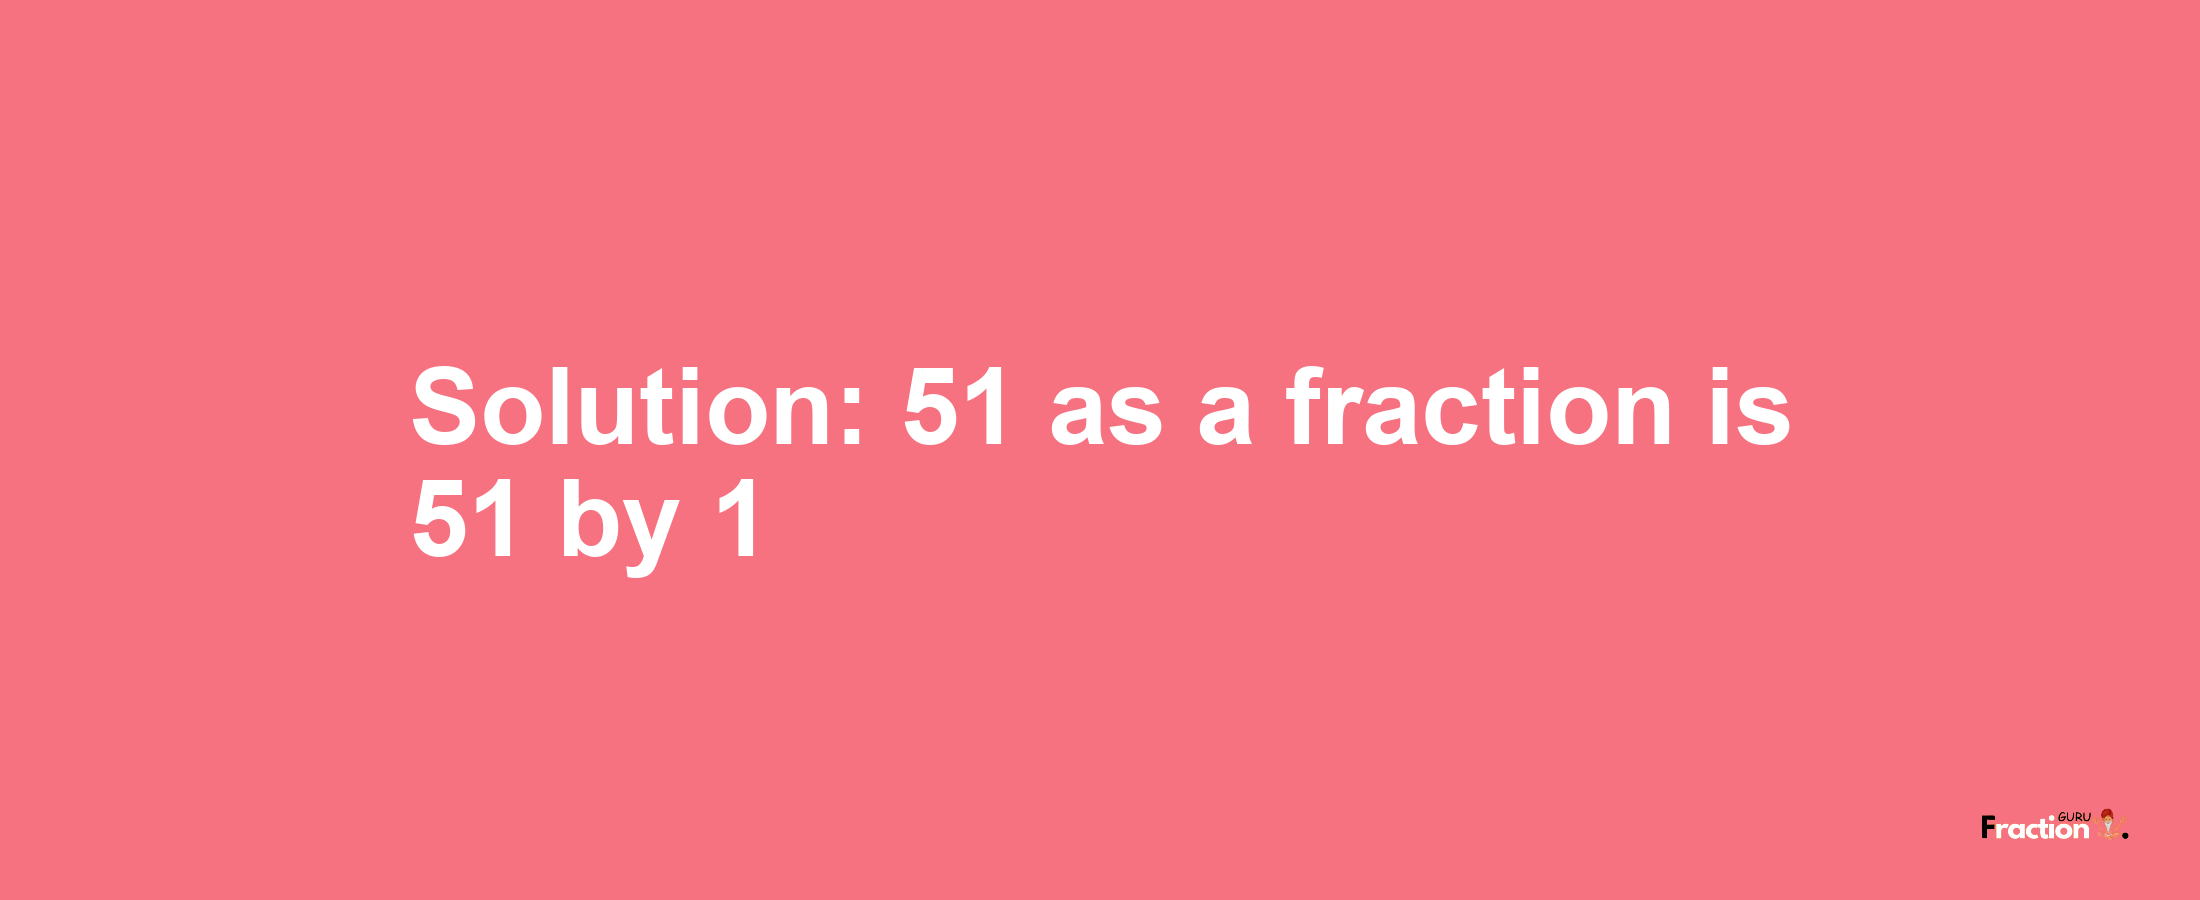 Solution:51 as a fraction is 51/1